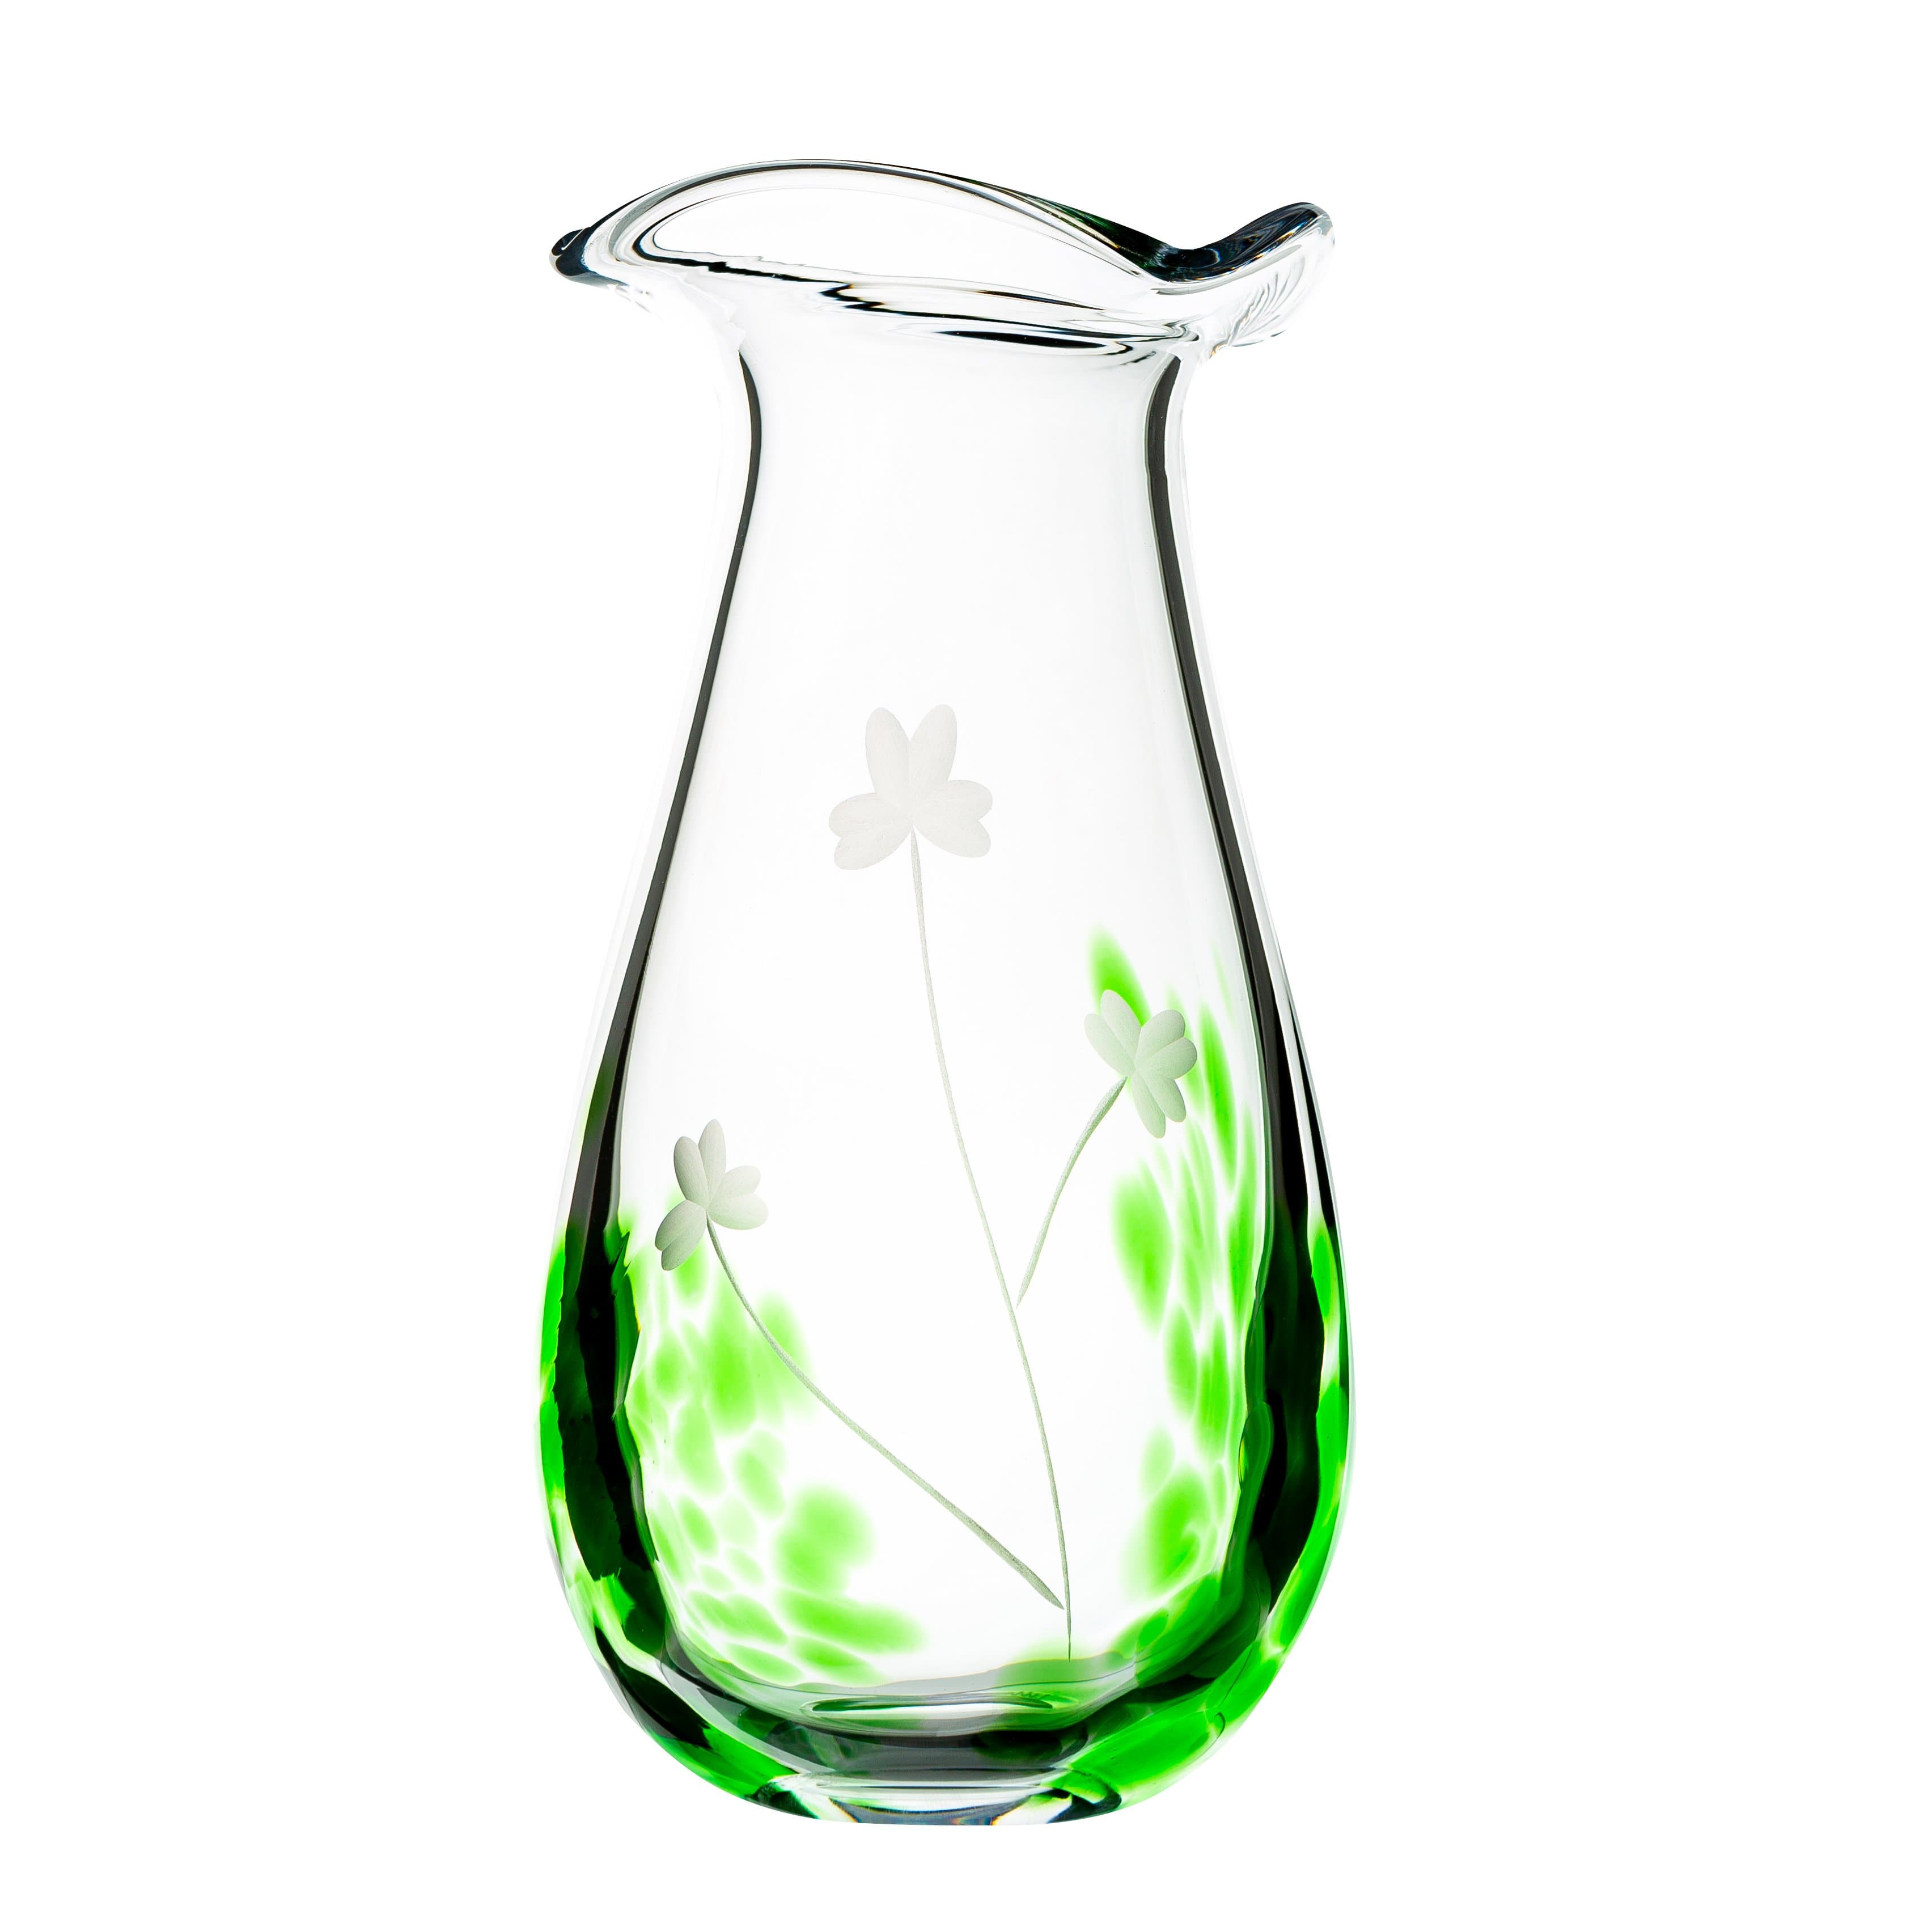 Shamrock Glassware Large Vase 10" Tall Irish Gift Handcrafted in Co. Waterford Ireland by Our Maker-Partner  in Co. Waterford